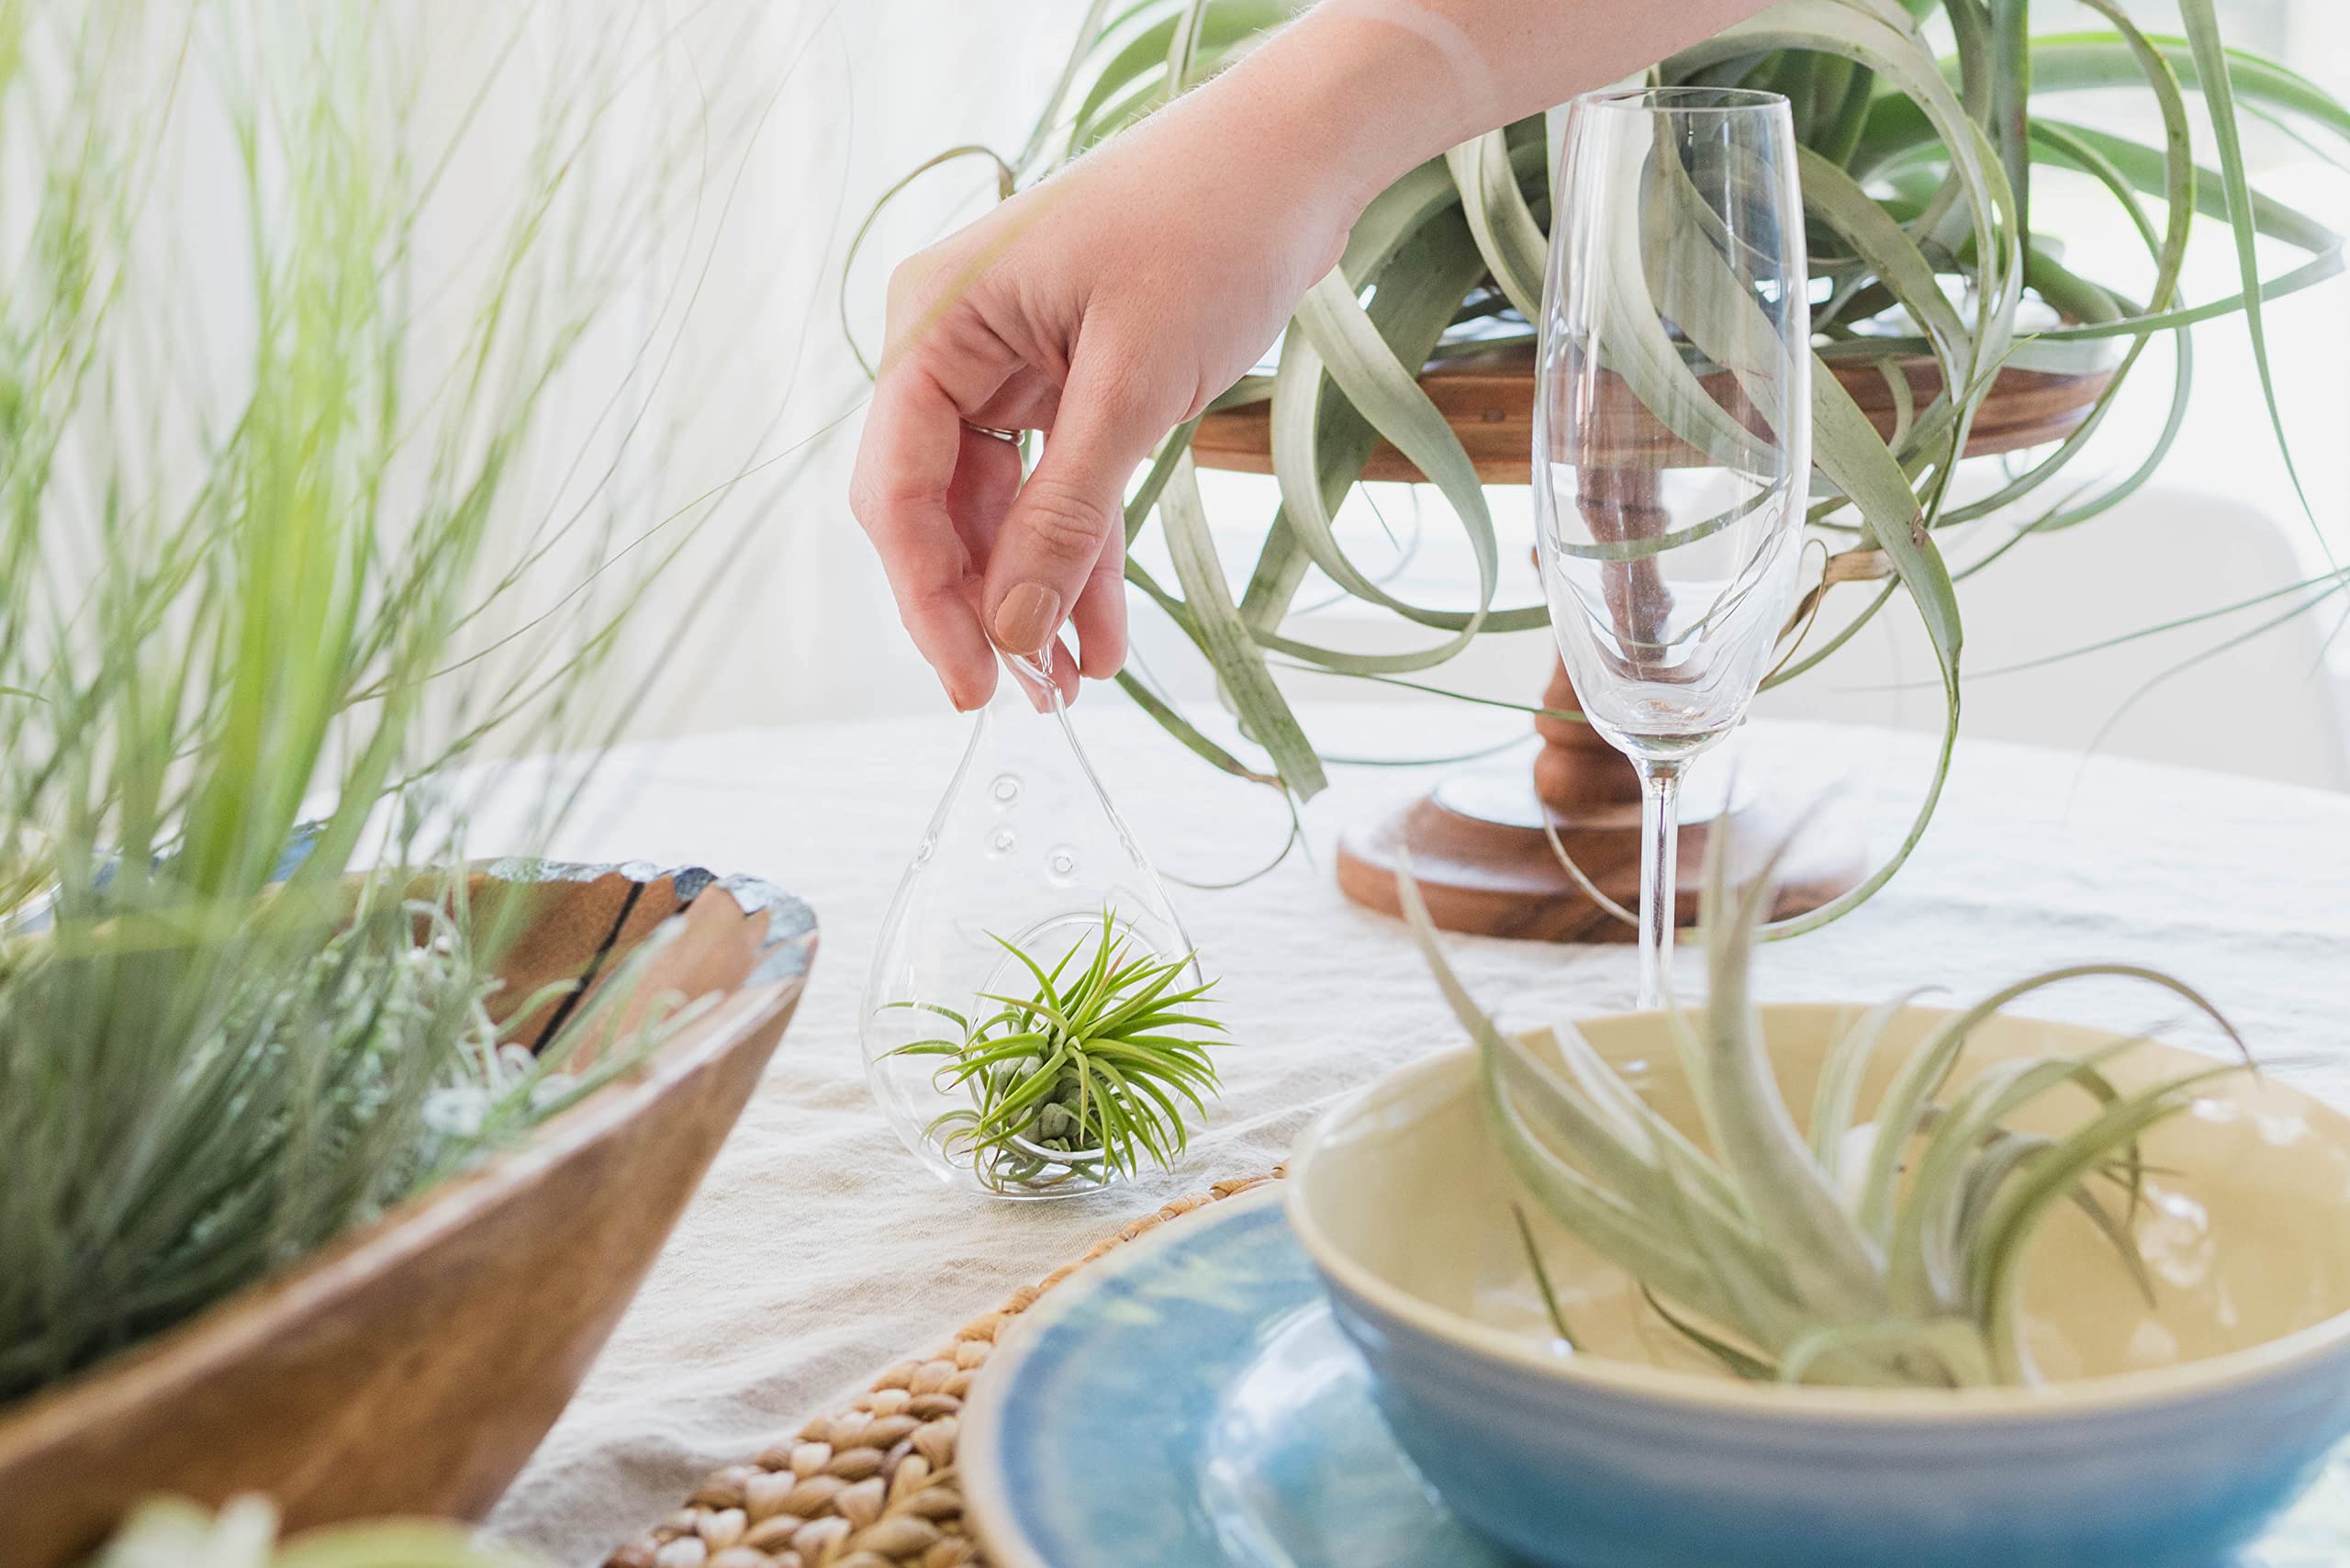 5 Pack Ionantha Air Plants Live Tillandsia Succulent Air Plant - Available in Wholesale and Bulk - Home and Garden Decor - Easy Care Indoor and Outdoor Plants Holders